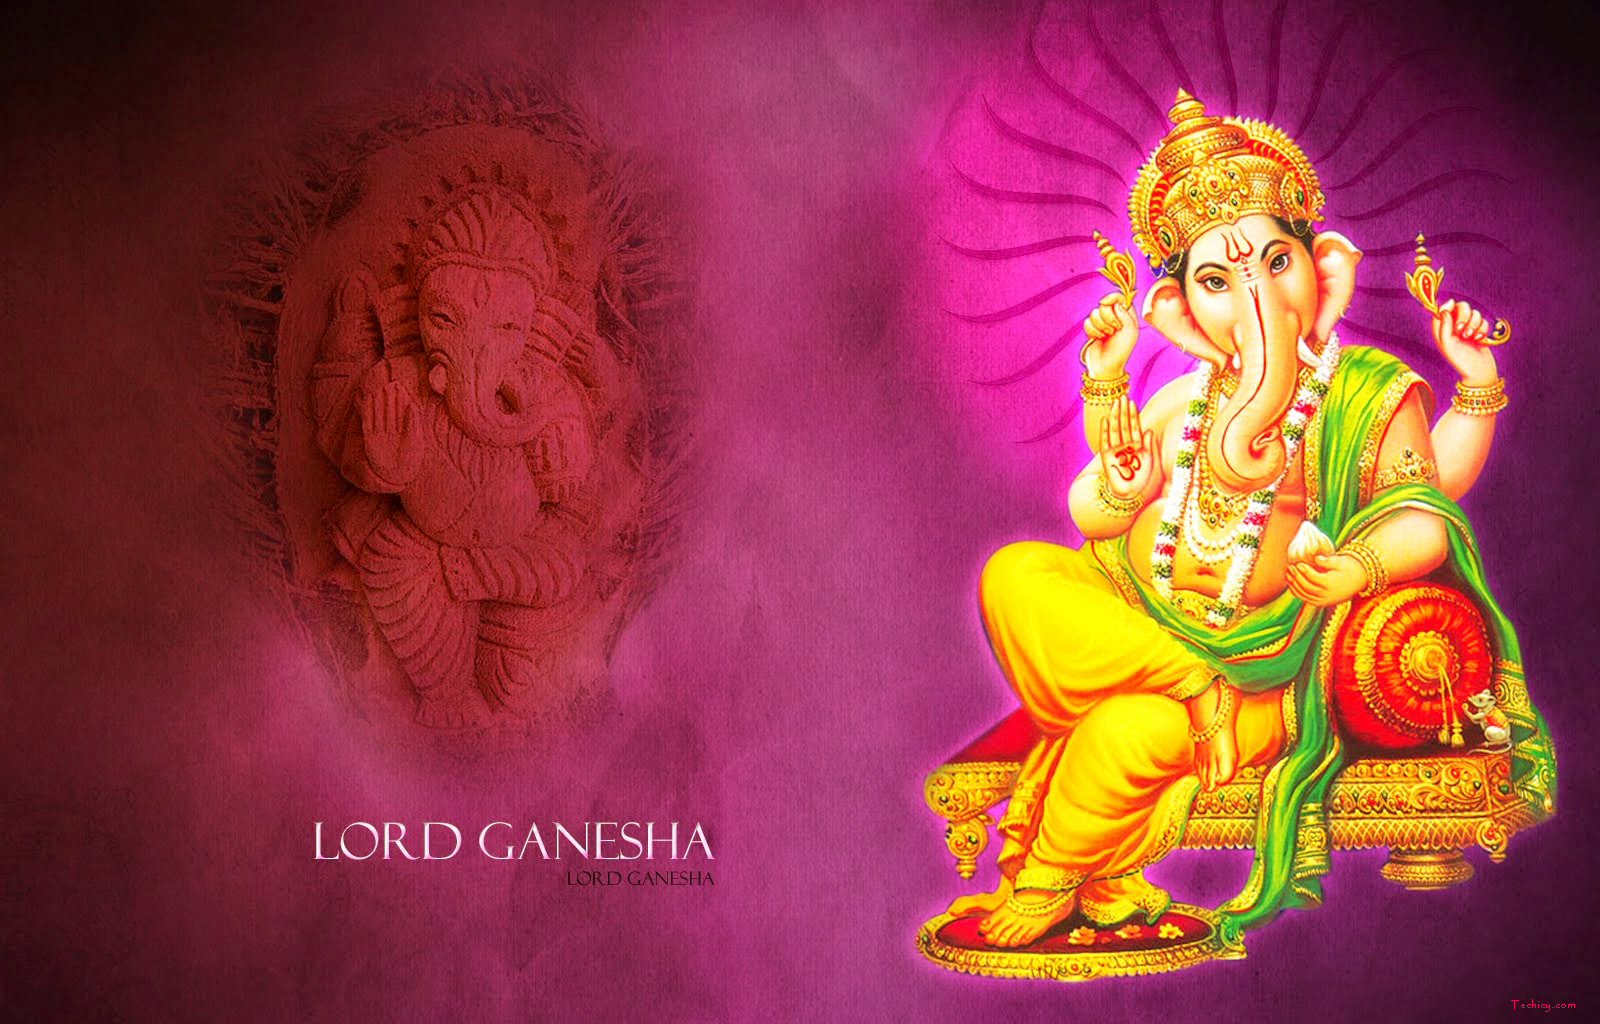 Ganesh Chaturthi Wallpapers For Mobile & PC – (Free Download)